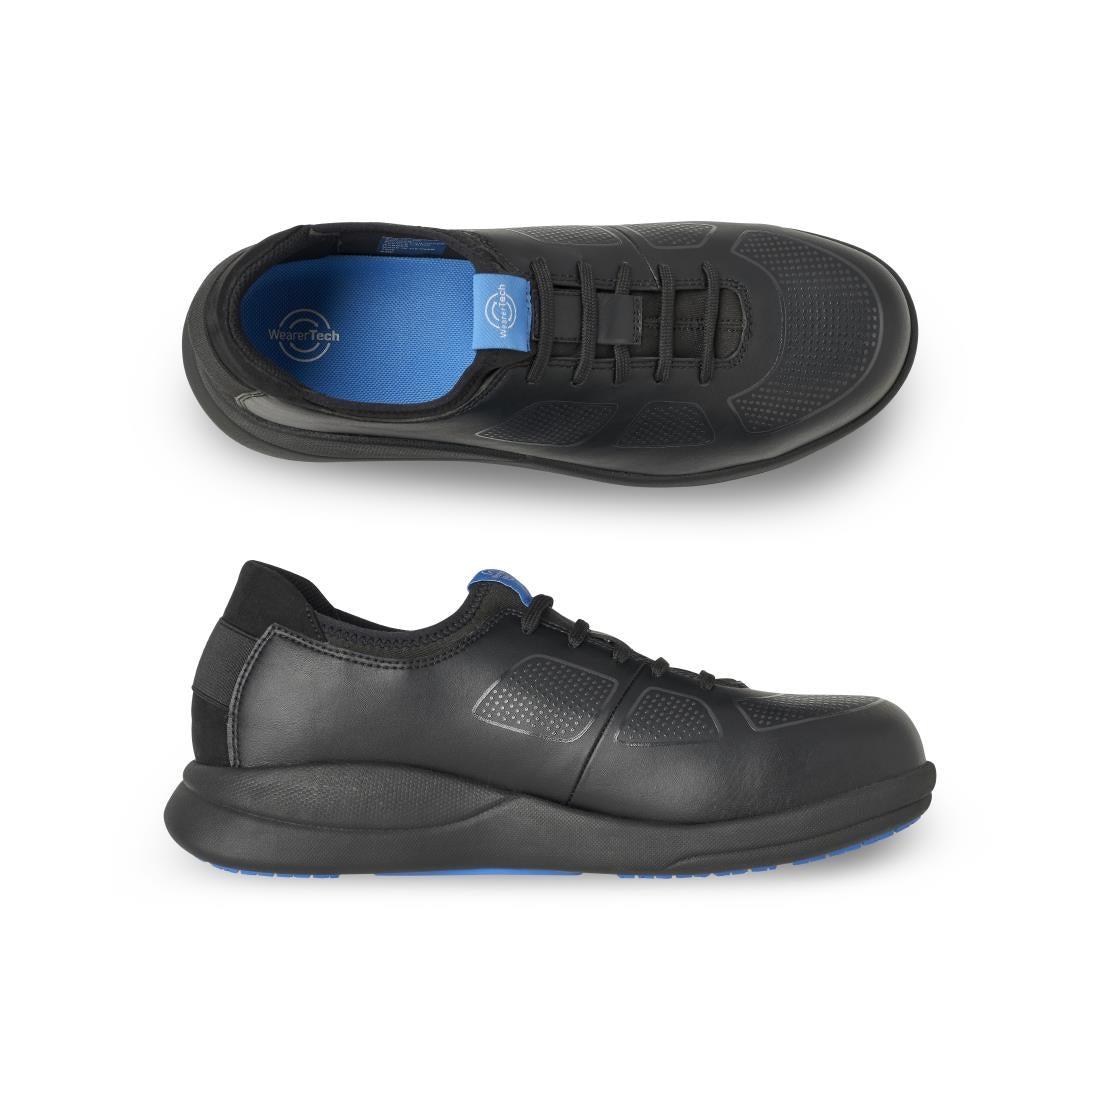 BB745-39 WearerTech Transform Safety Toe Trainer Black with Modular Insole Size 39